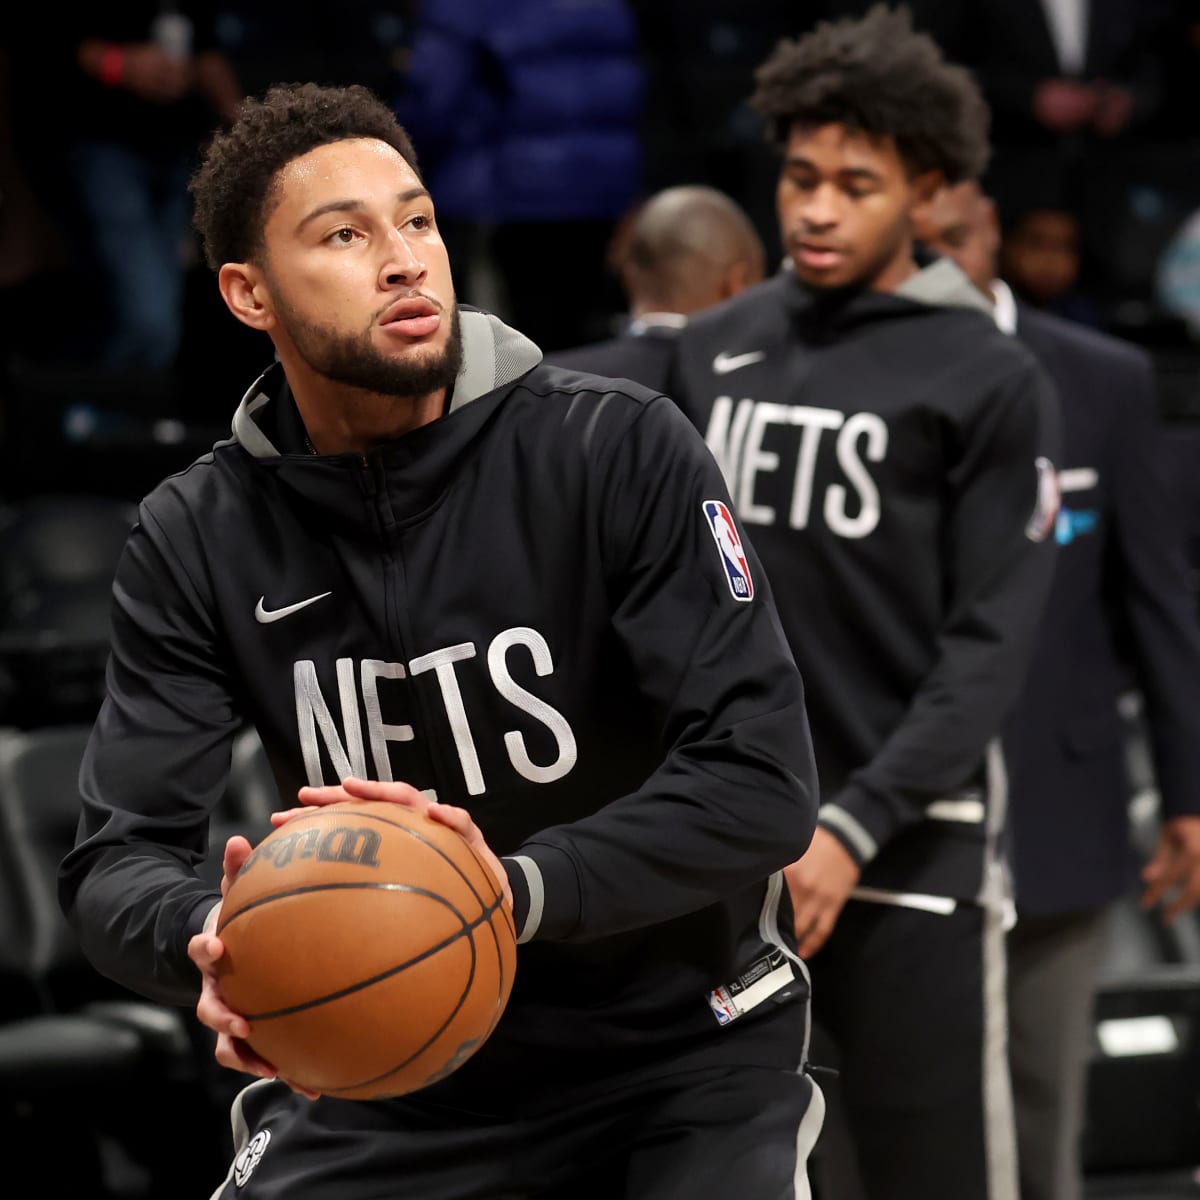 After year of taunts and insults, Nets' star Ben Simmons is ready